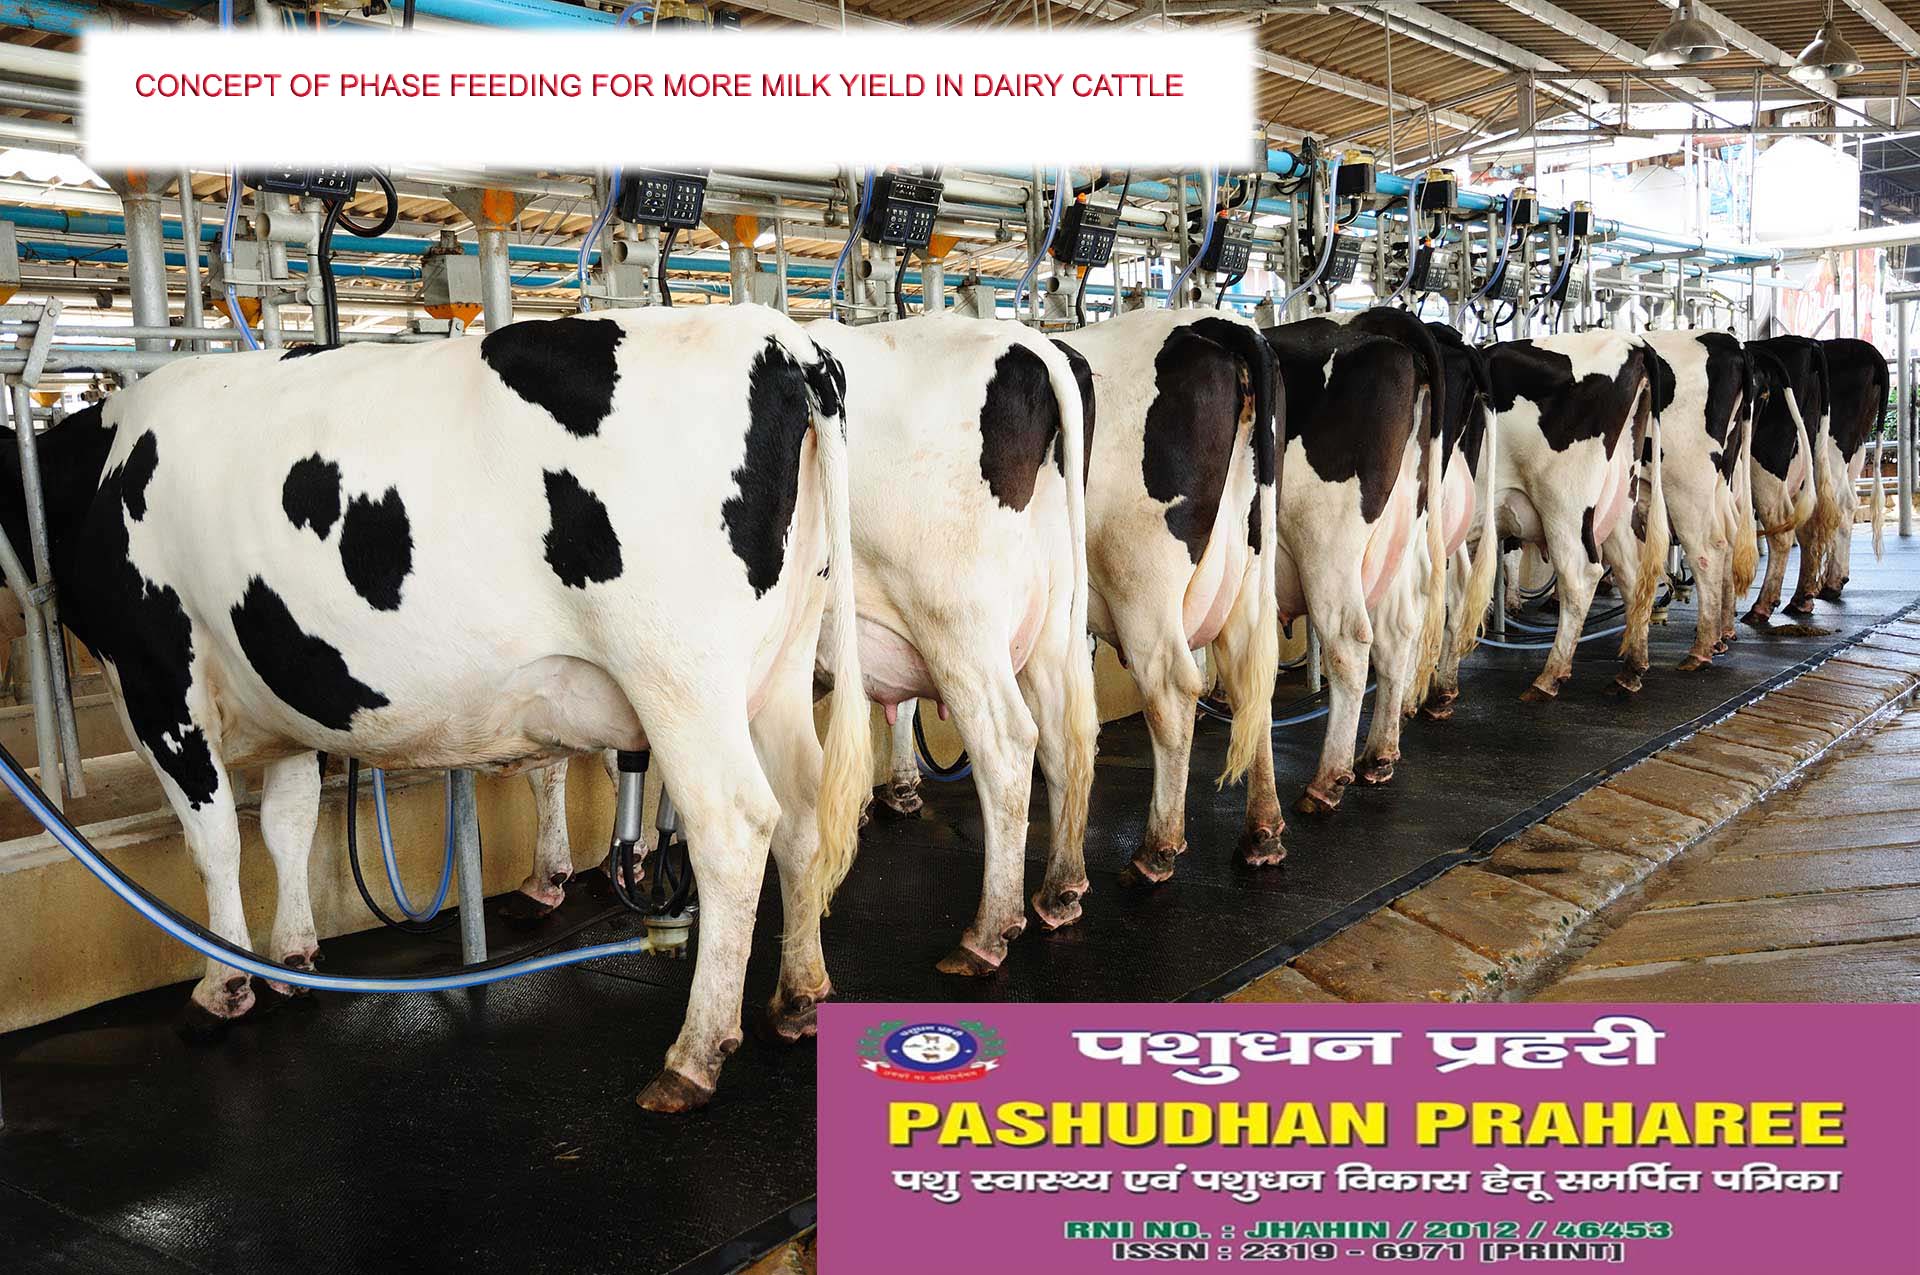 CONCEPT OF PHASE FEEDING FOR MORE MILK YIELD IN DAIRY CATTLE – Pashudhan  praharee